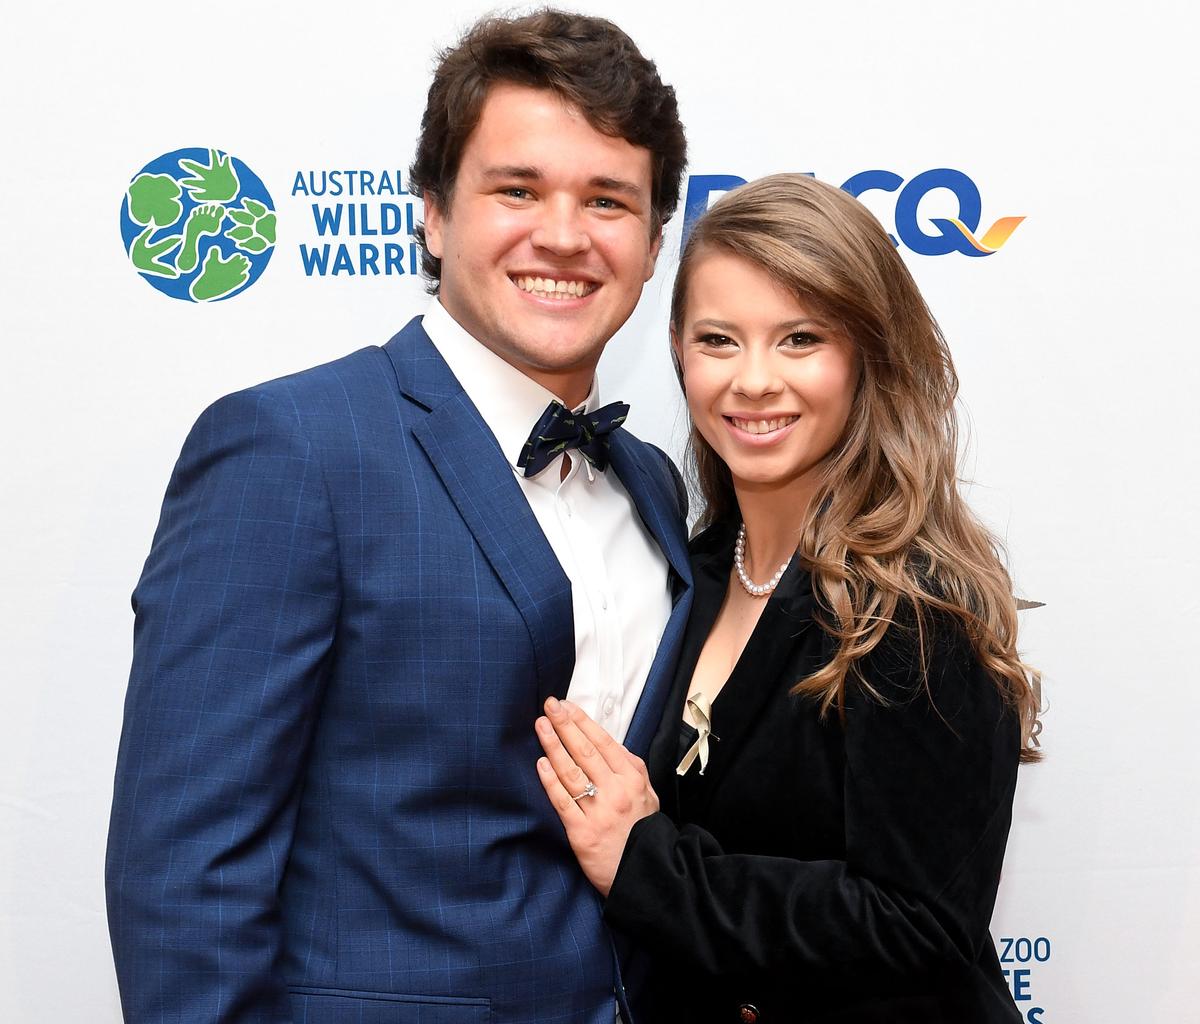 Bindi Irwin poses for a photo with then-fiancé Chandler Powell at the annual Steve Irwin Gala Dinner at Brisbane Convention & Exhibition Centre on Nov. 9, 2019, in Brisbane, Australia. (Bradley Kanaris/Getty Images)